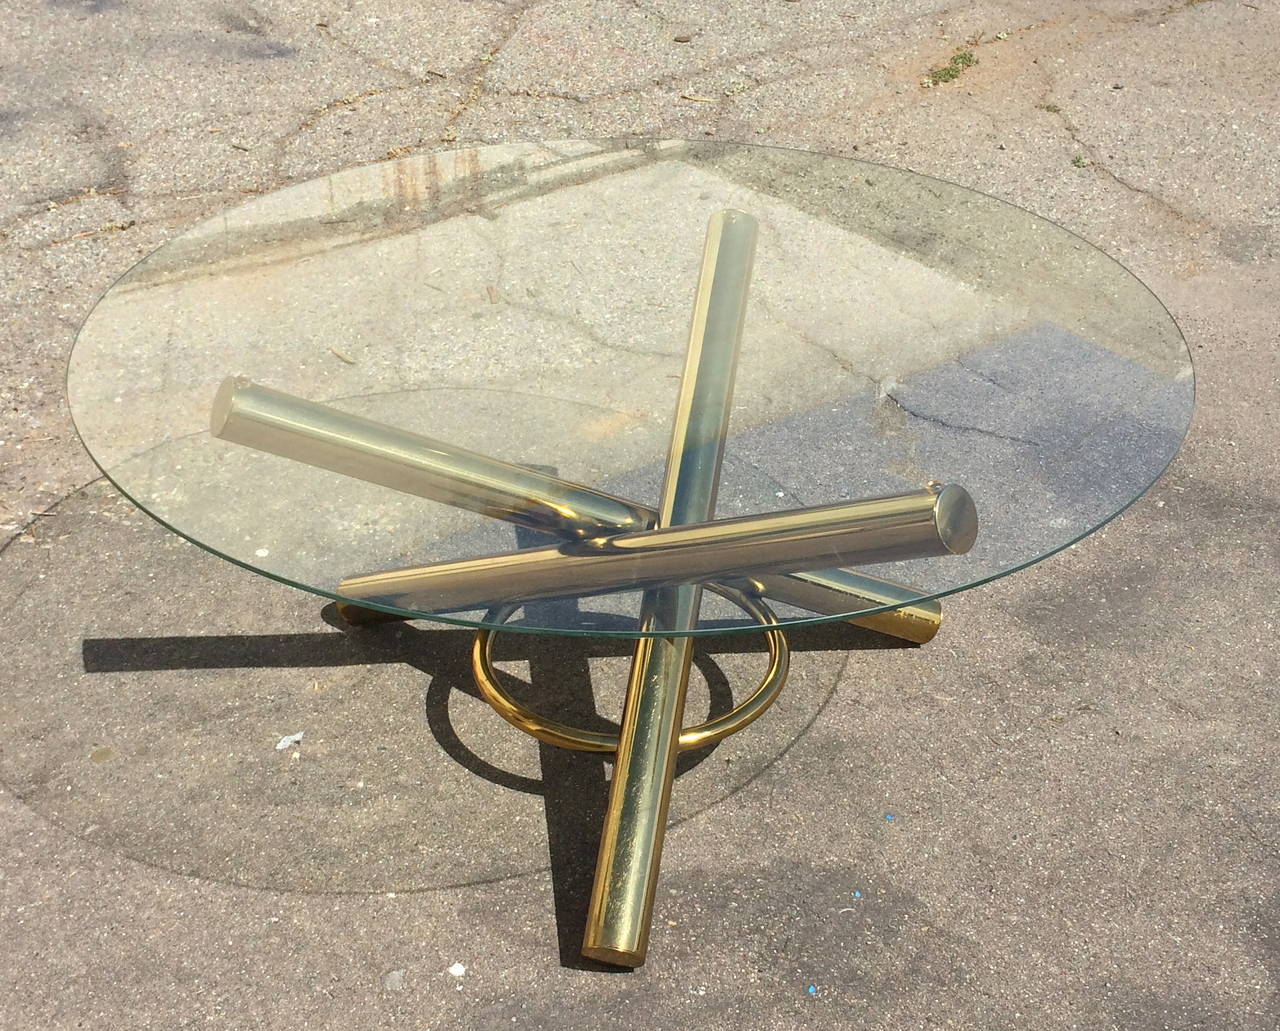 Jax-Shaped Cofffee Tables
Circa 1970s
Brass-plated metal, glass top
22 inches high, 36 inches in diameter
Overall good condition. Minor scratches to glass, some wear to base.